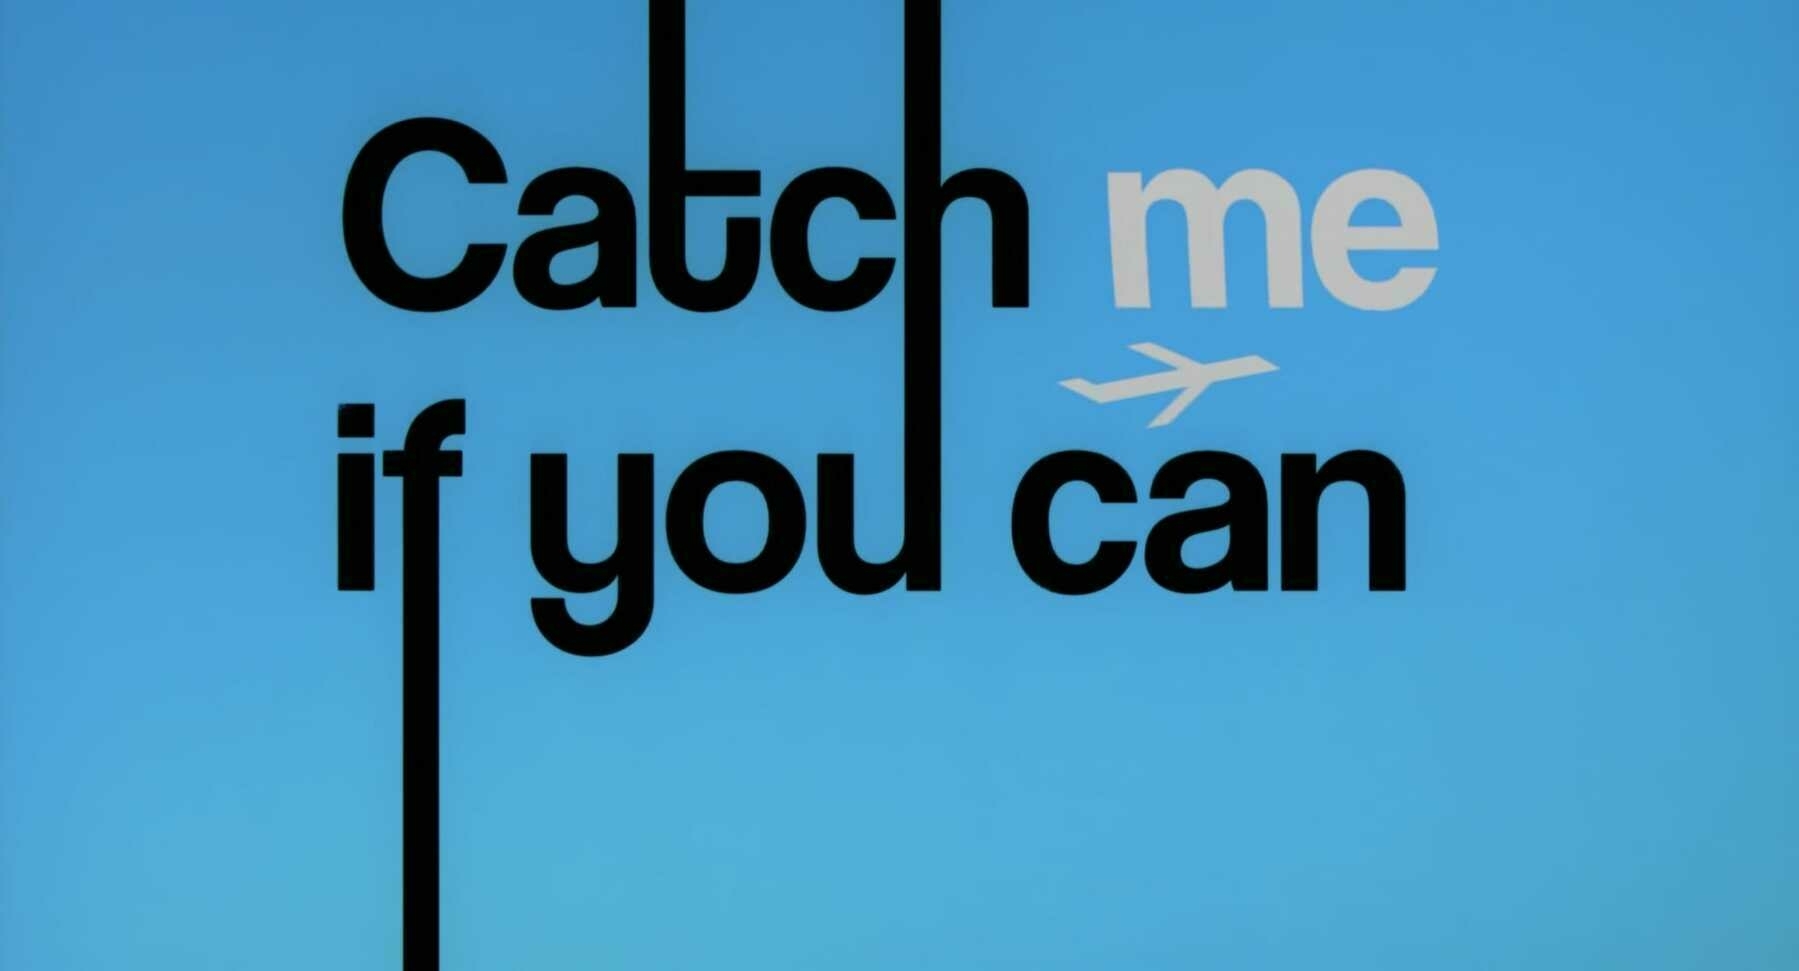 The title card for the film, Catch Me If You Can.